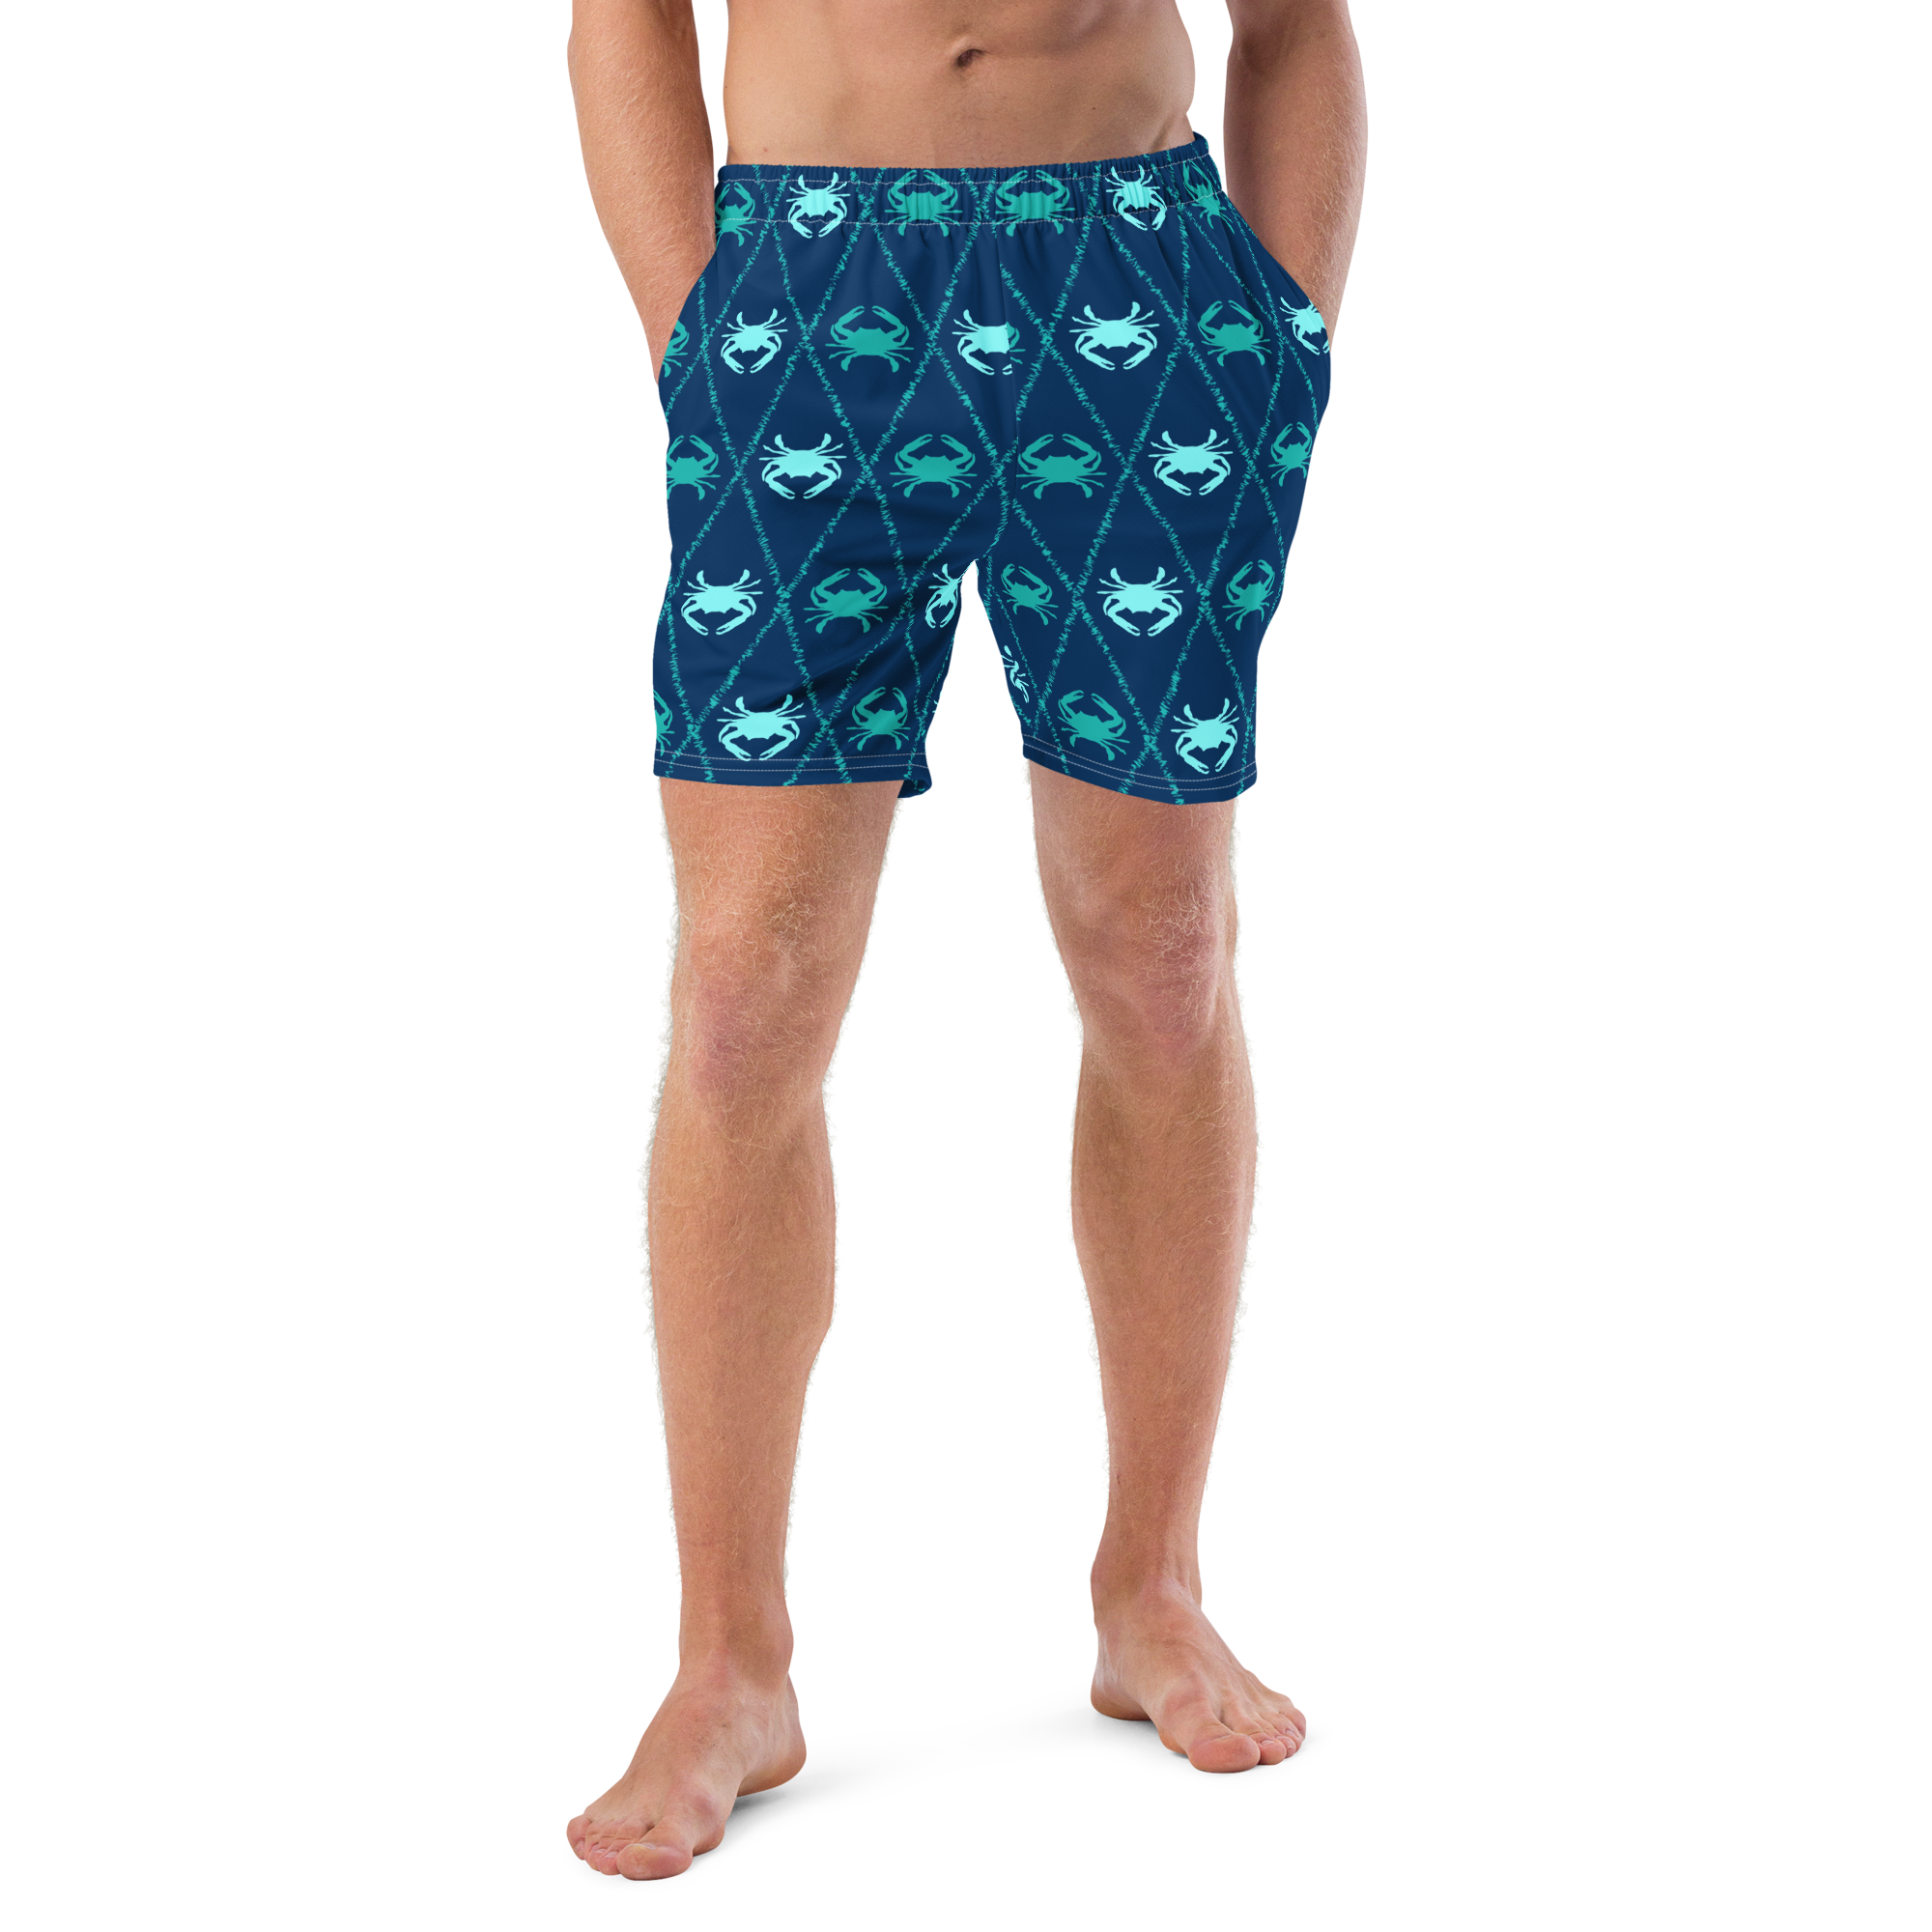 Men's Crabbies Recycled Mid-Length UPF 50+ Swim Shorts FIND YOUR COAST  CO